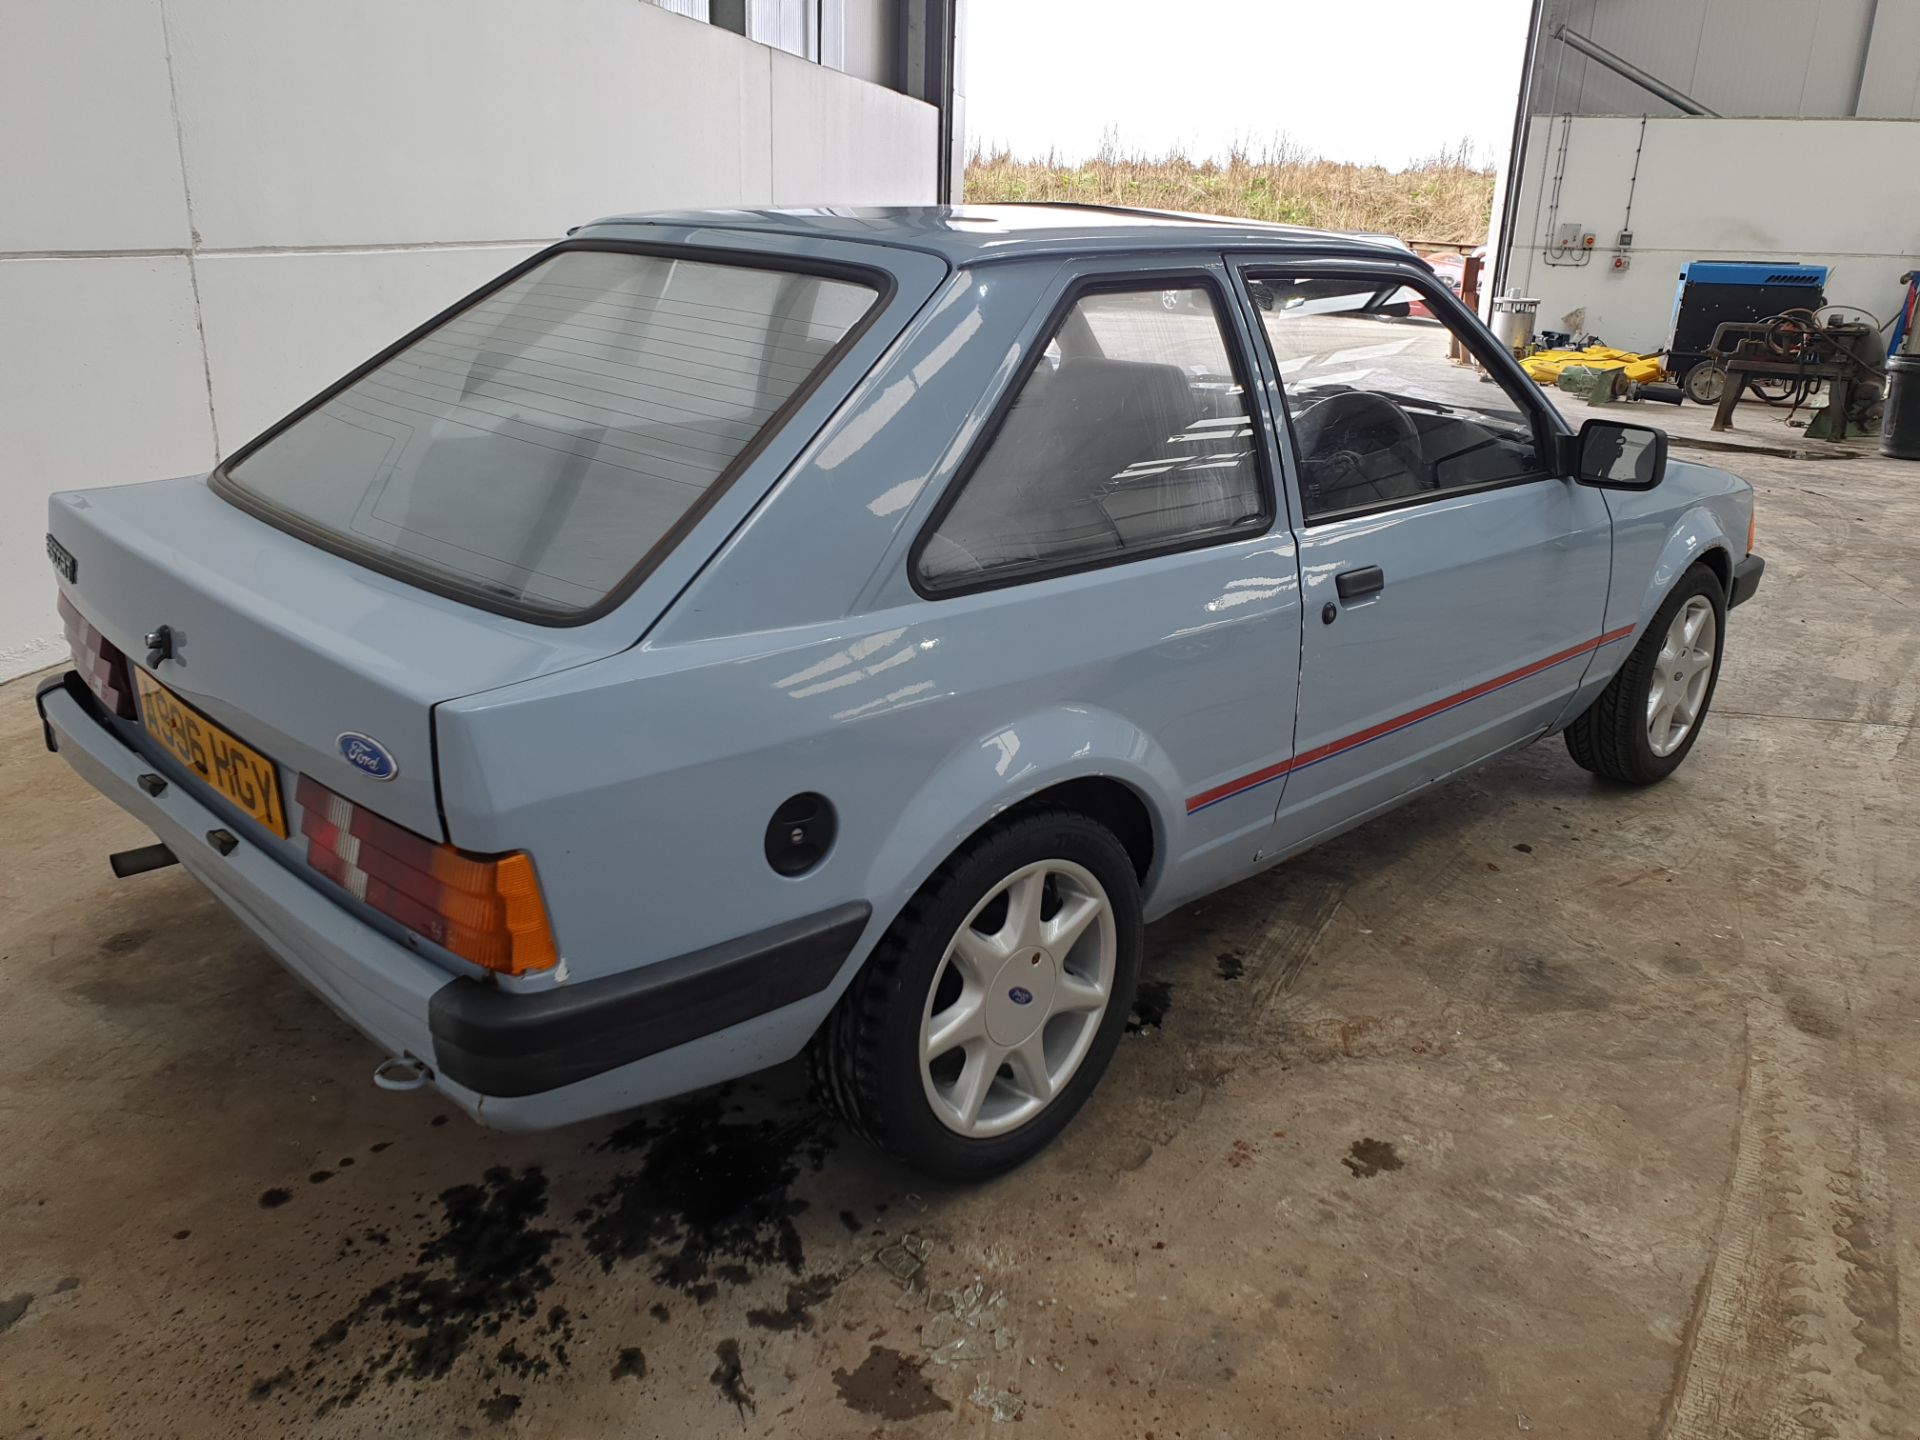 1984 Ford Escort 1100 3dr - Image 3 of 14